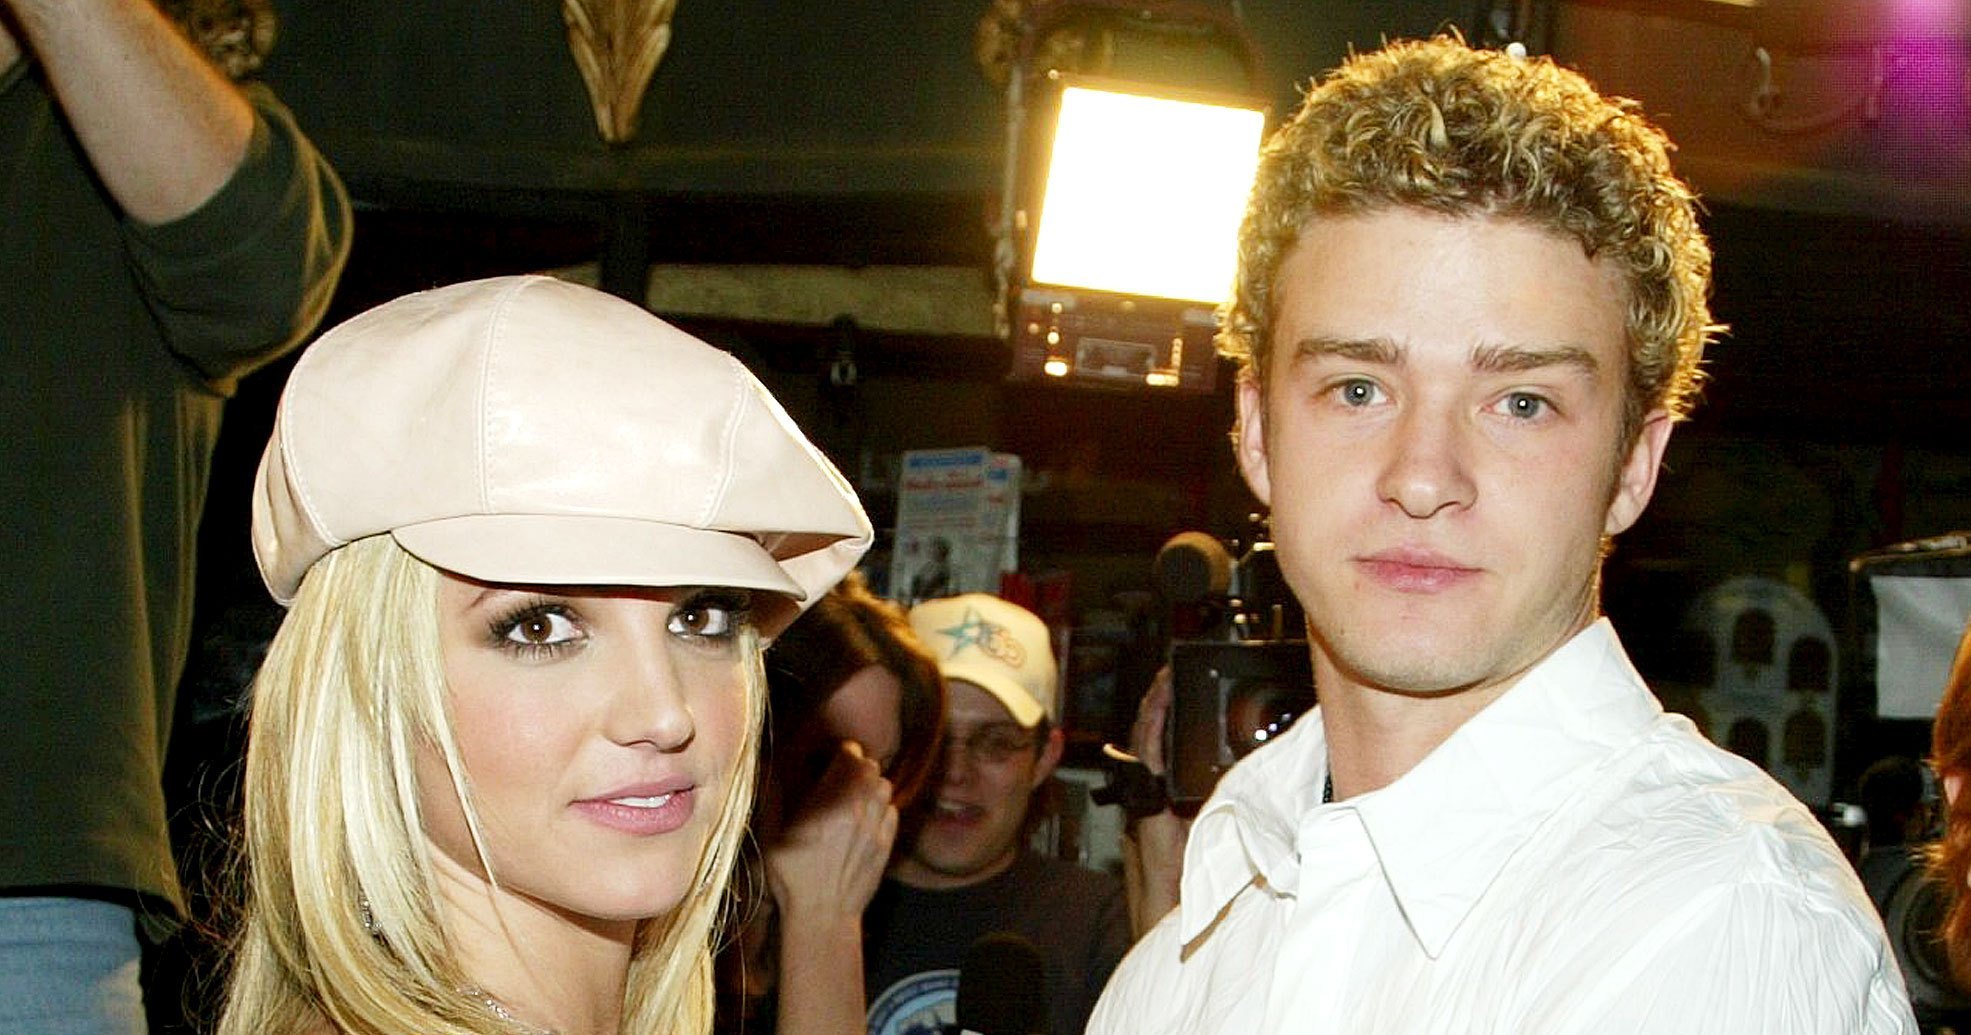 Why Did JT Apologize to Britney Spears? A Timeline of Their Ups and Downs